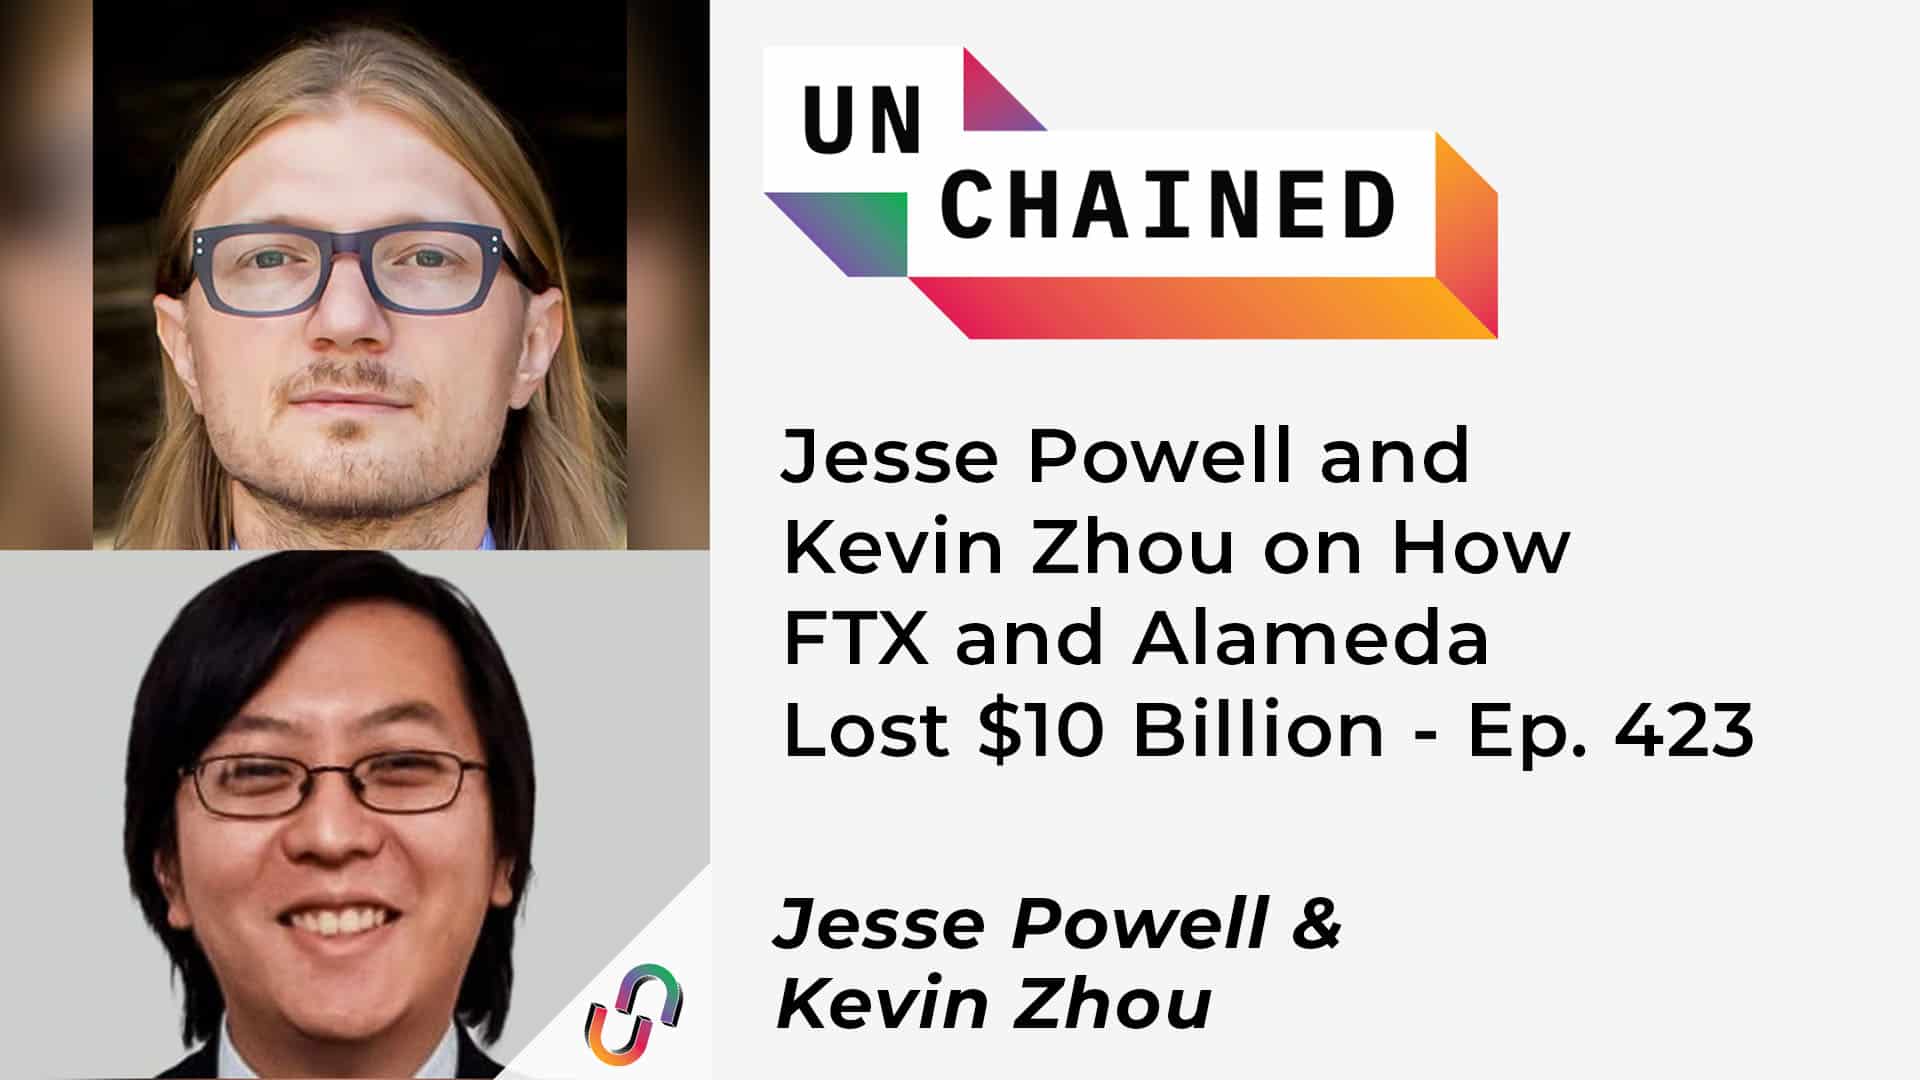 Jesse Powell and Kevin Zhou on How FTX and Alameda Lost $10 Billion - Ep. 423